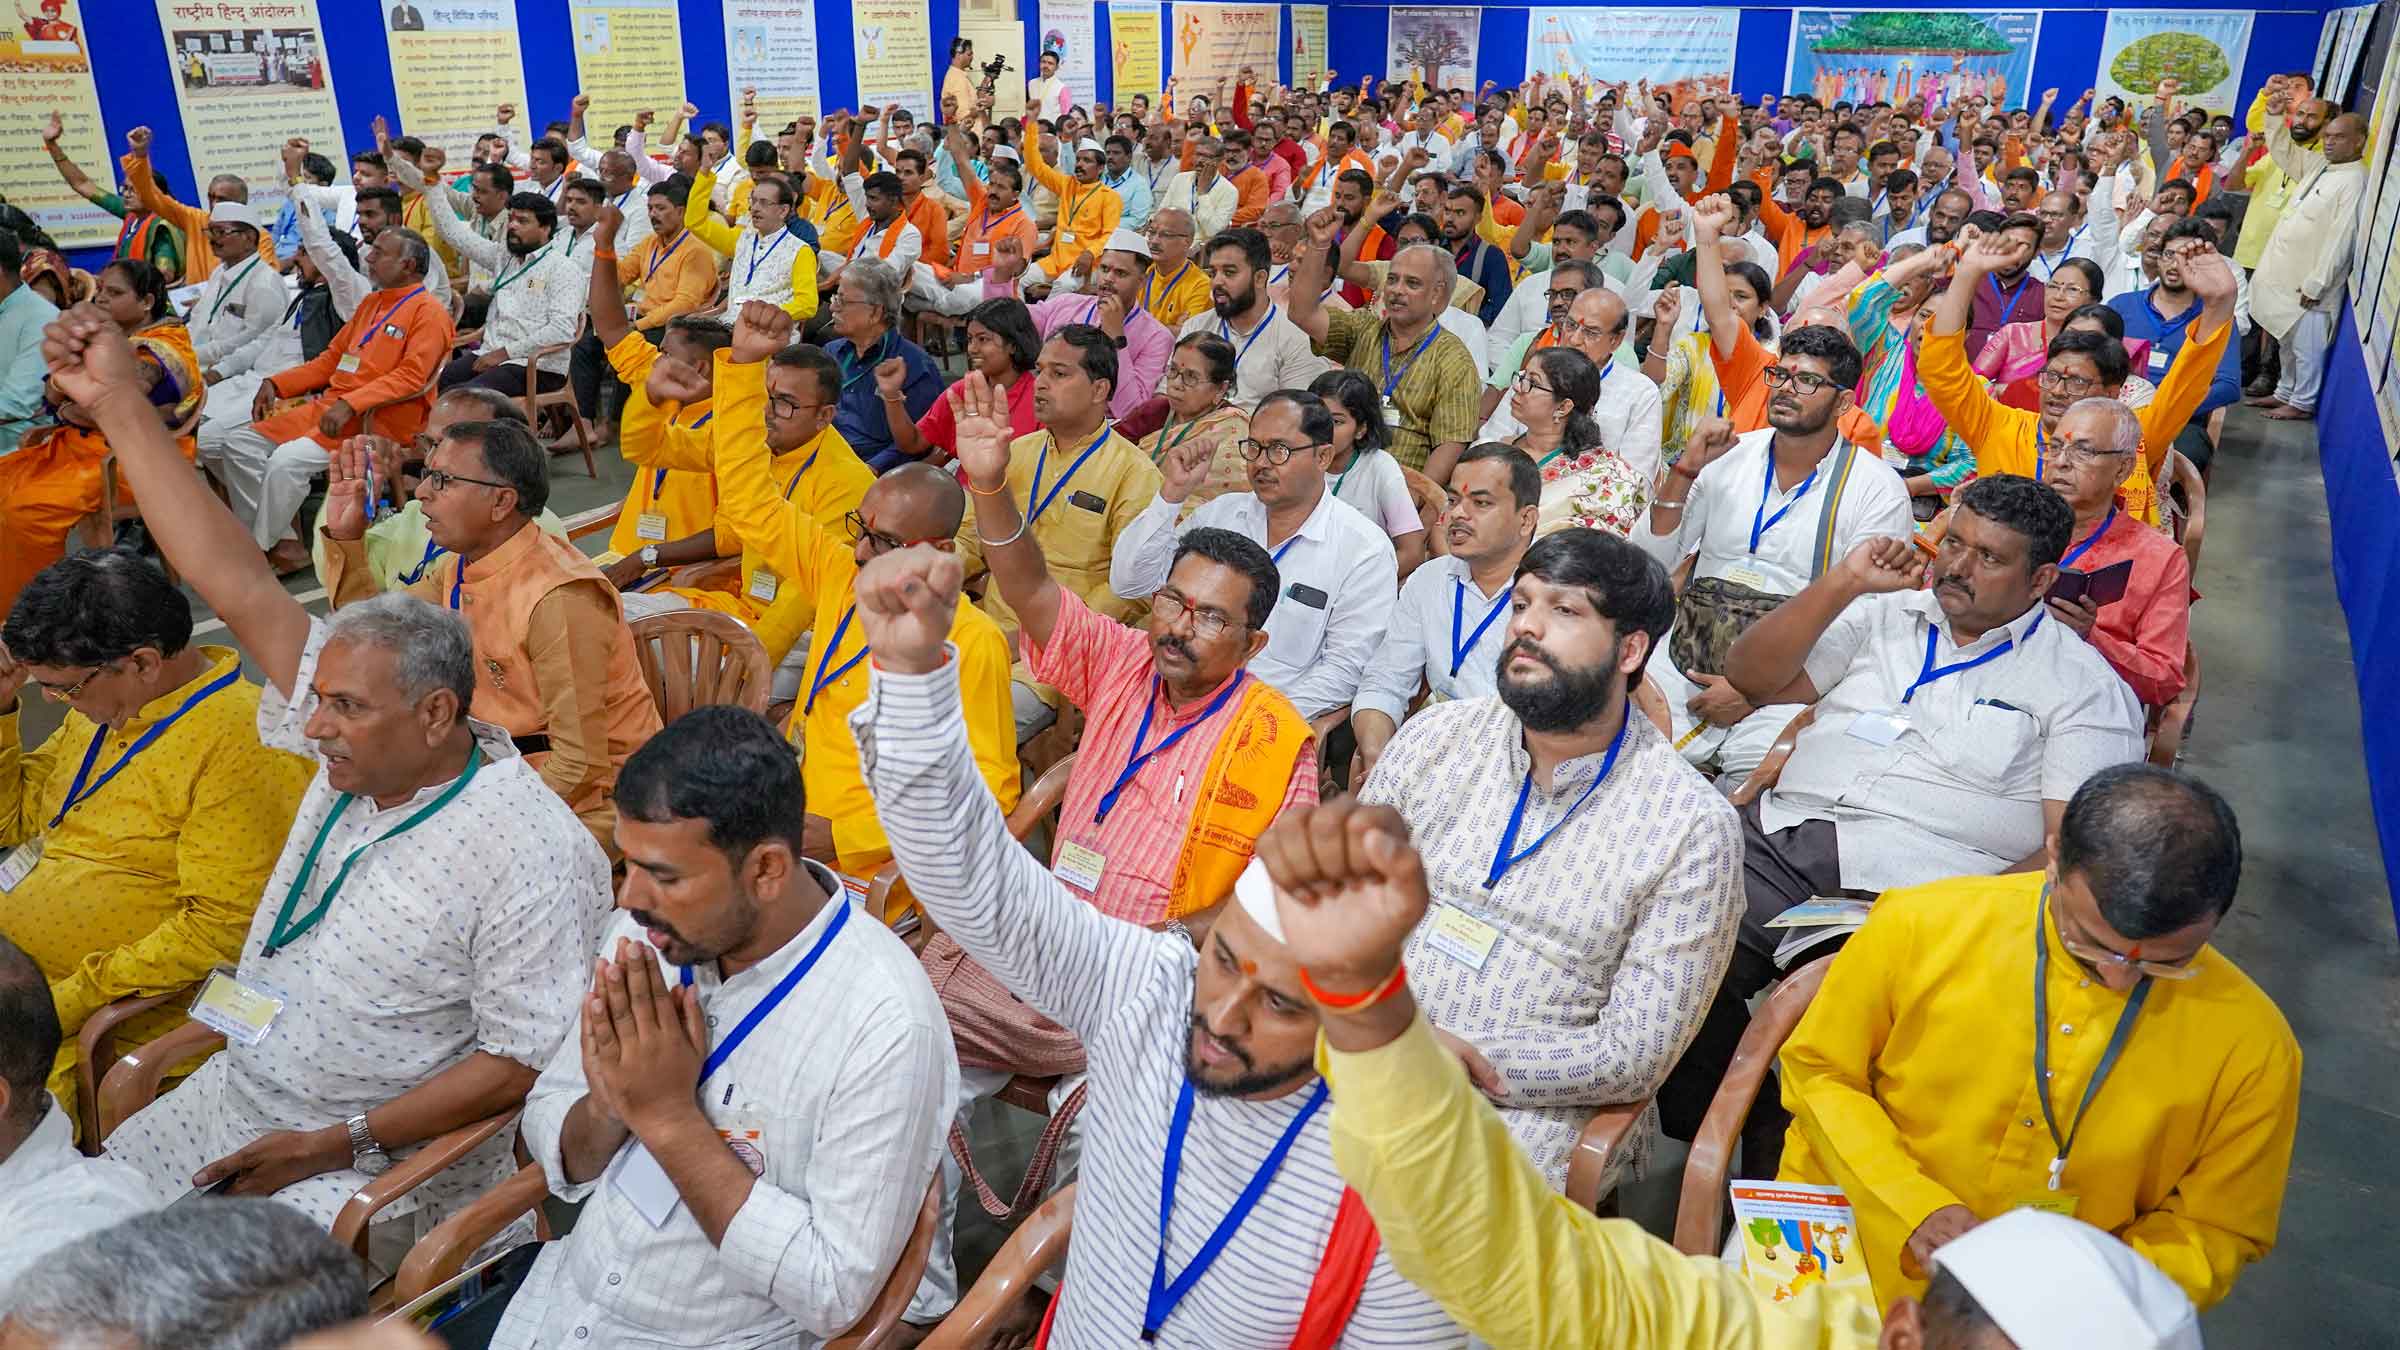 Hindutvavadis participating enthusiastically in the programme